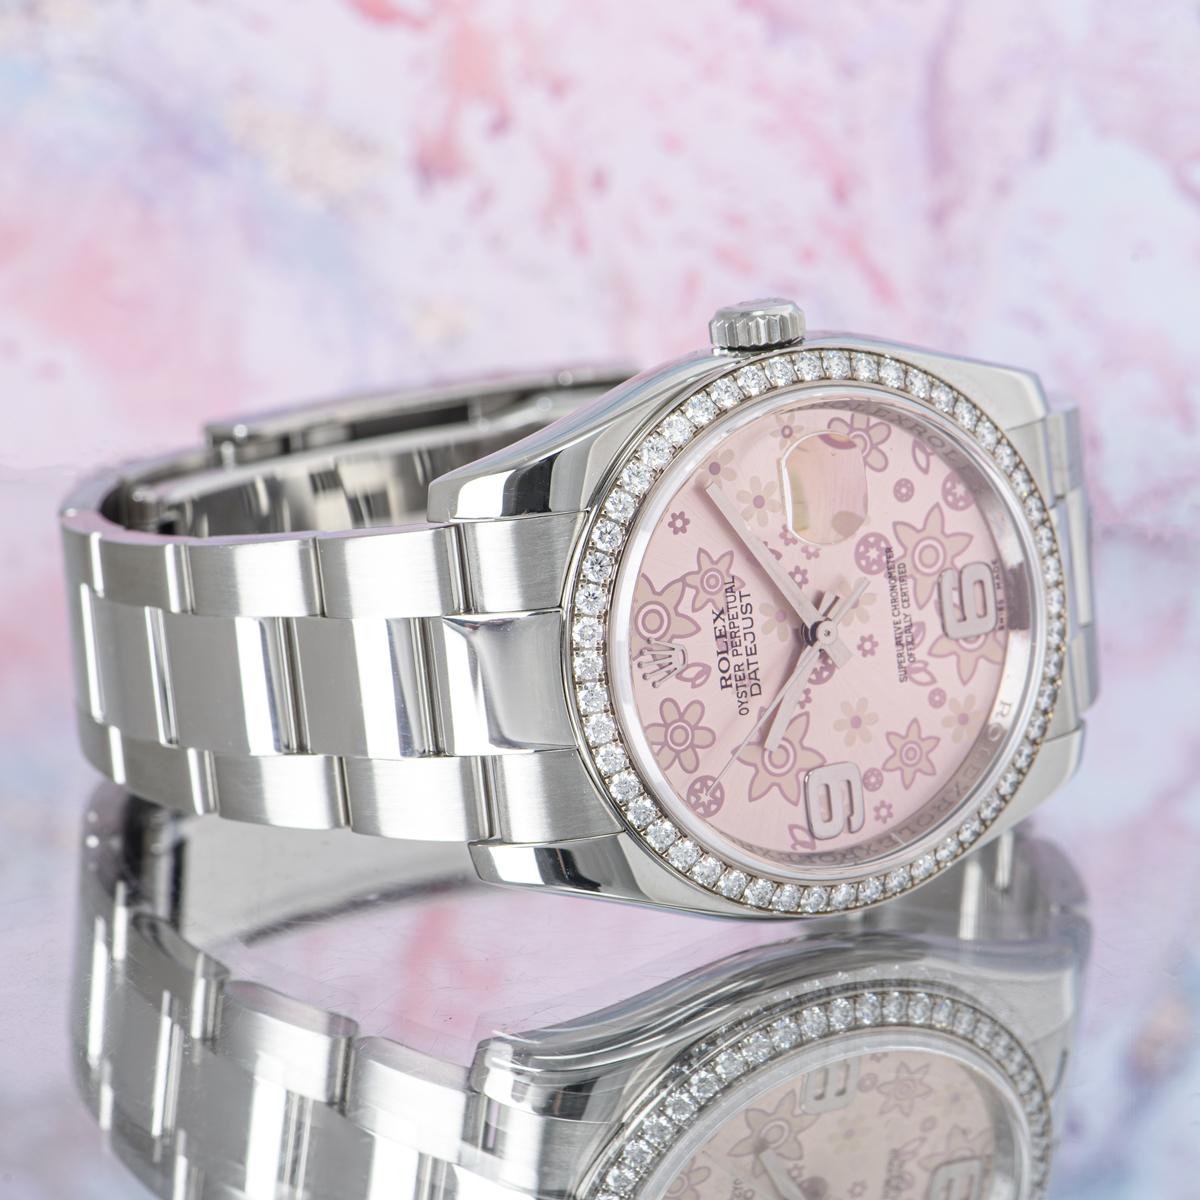 Women's Rolex DateJust Pink Floral Dial 116244 Watch For Sale